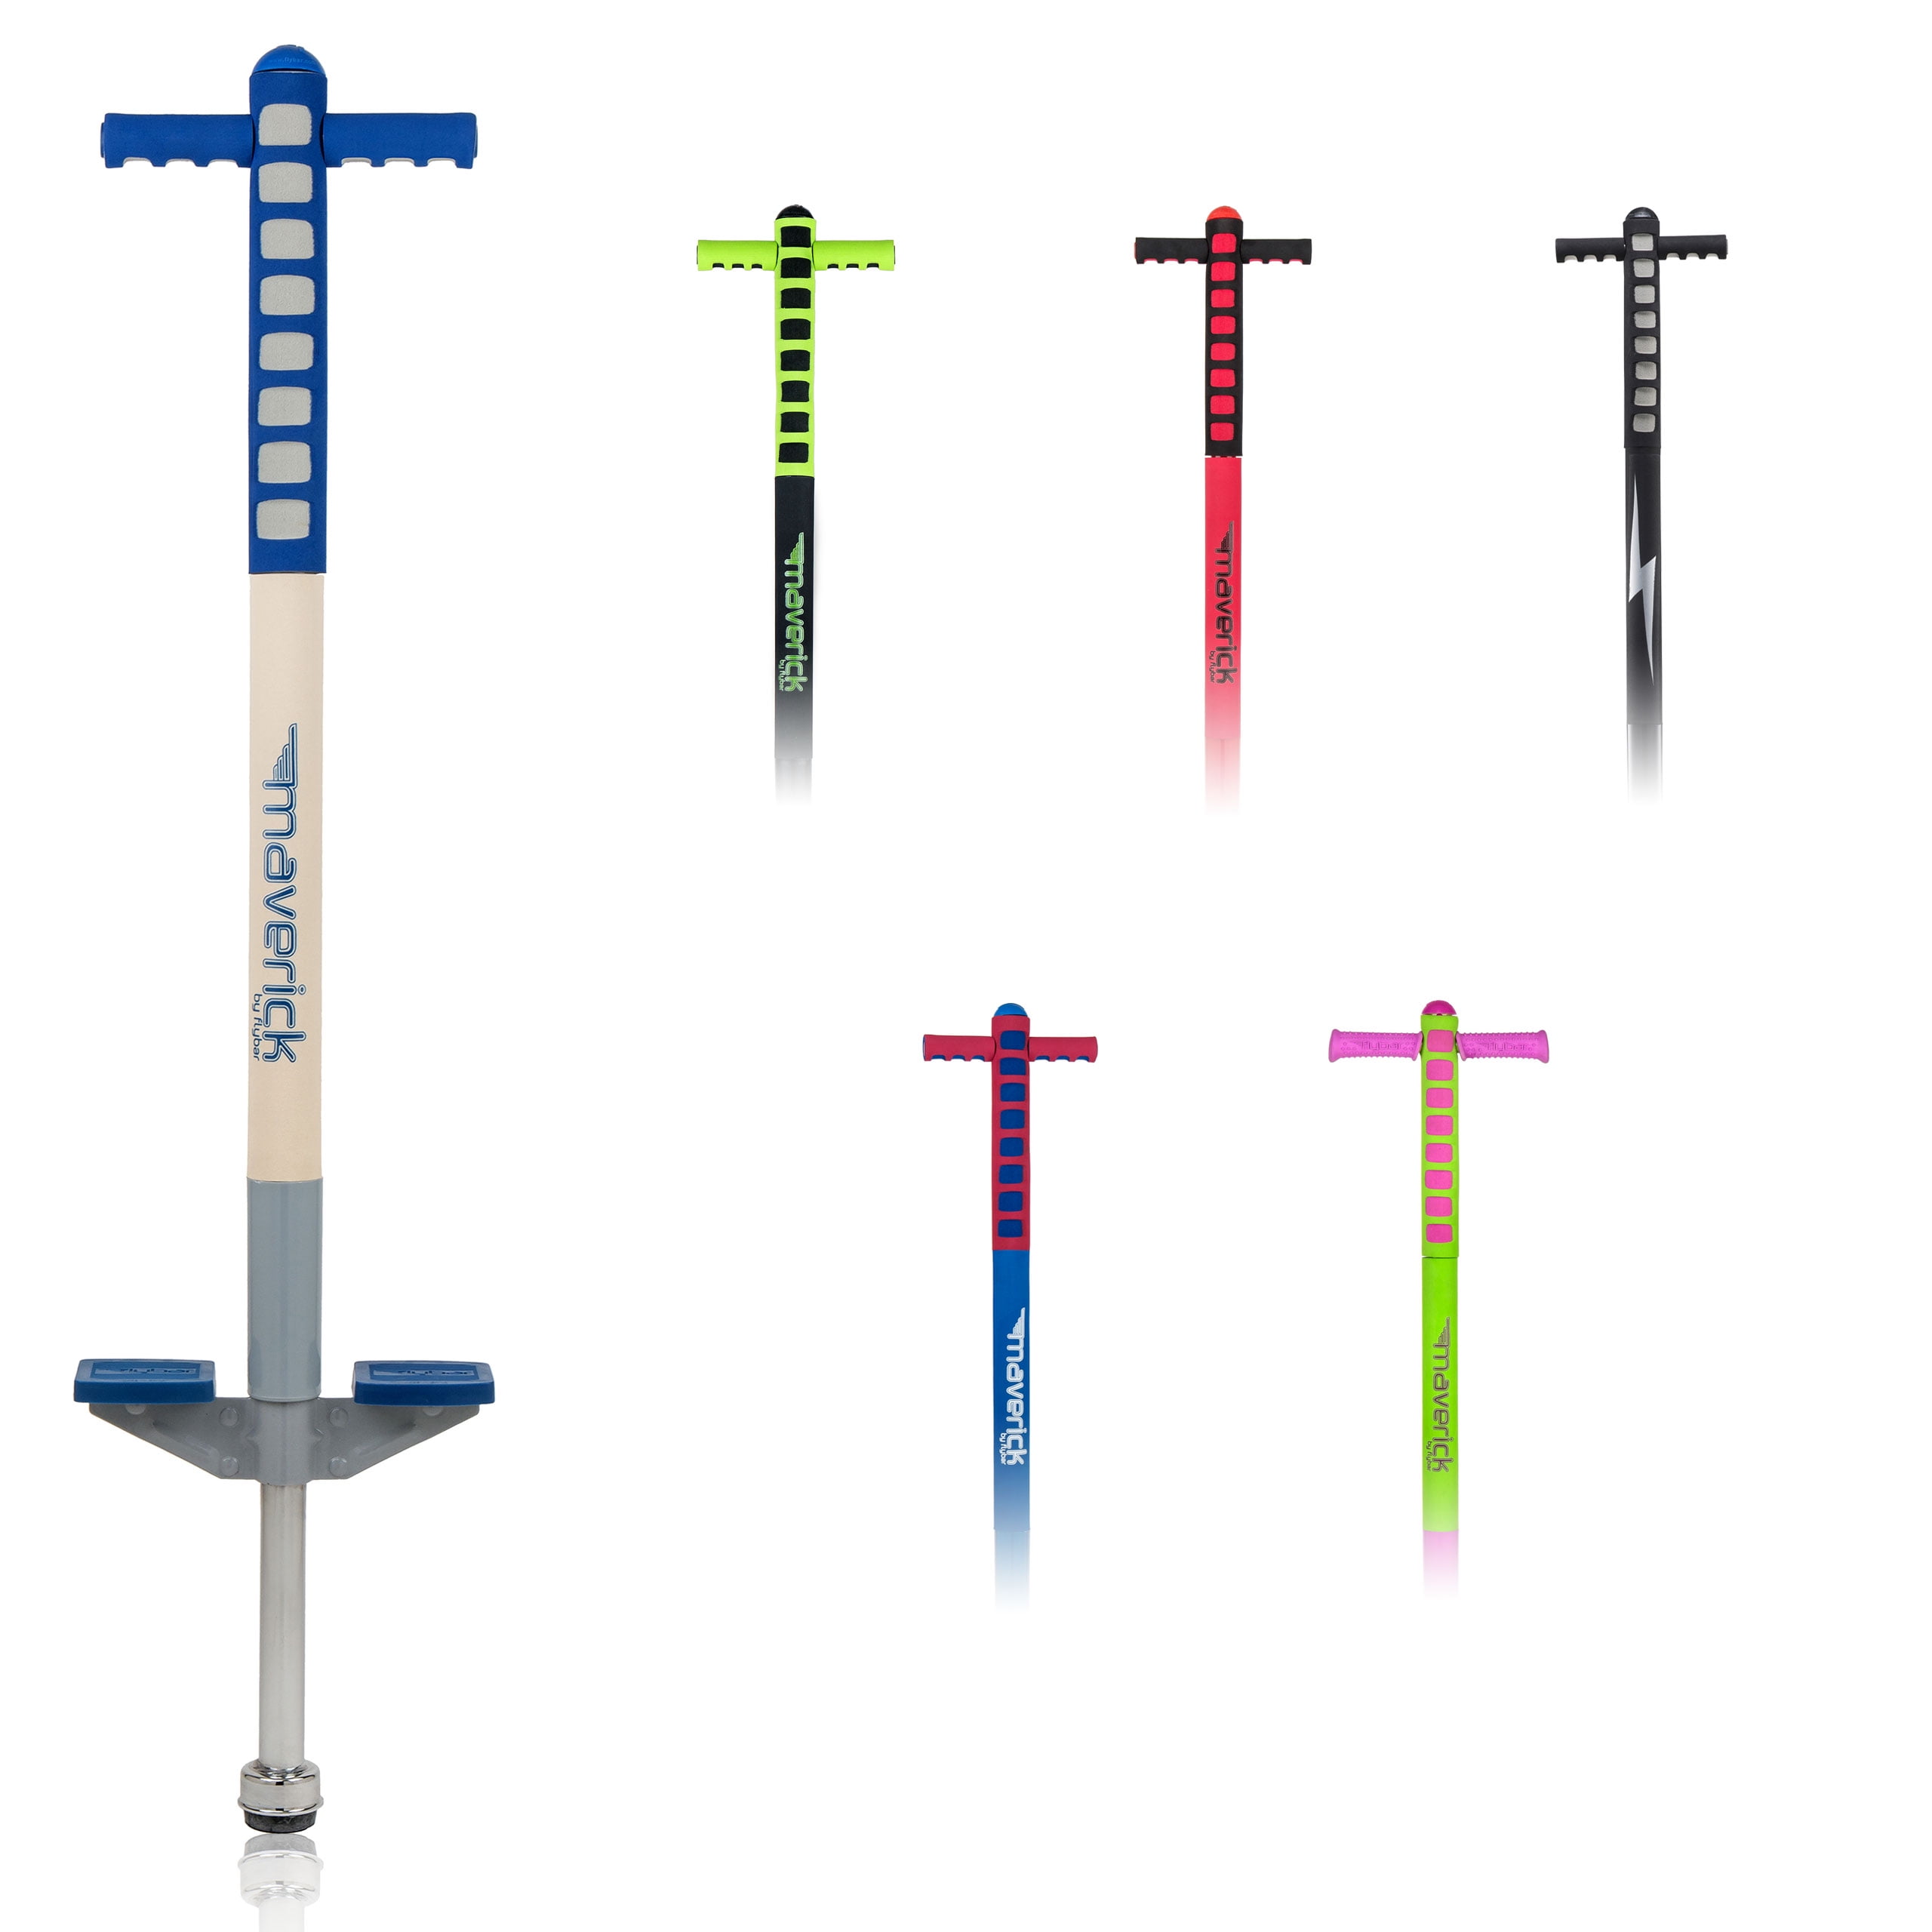 Flybar Foam Maverick Pogo Stick for Kids Ages 5+ Weights 40 to 80 Pounds by The Original Pogo Stick Company